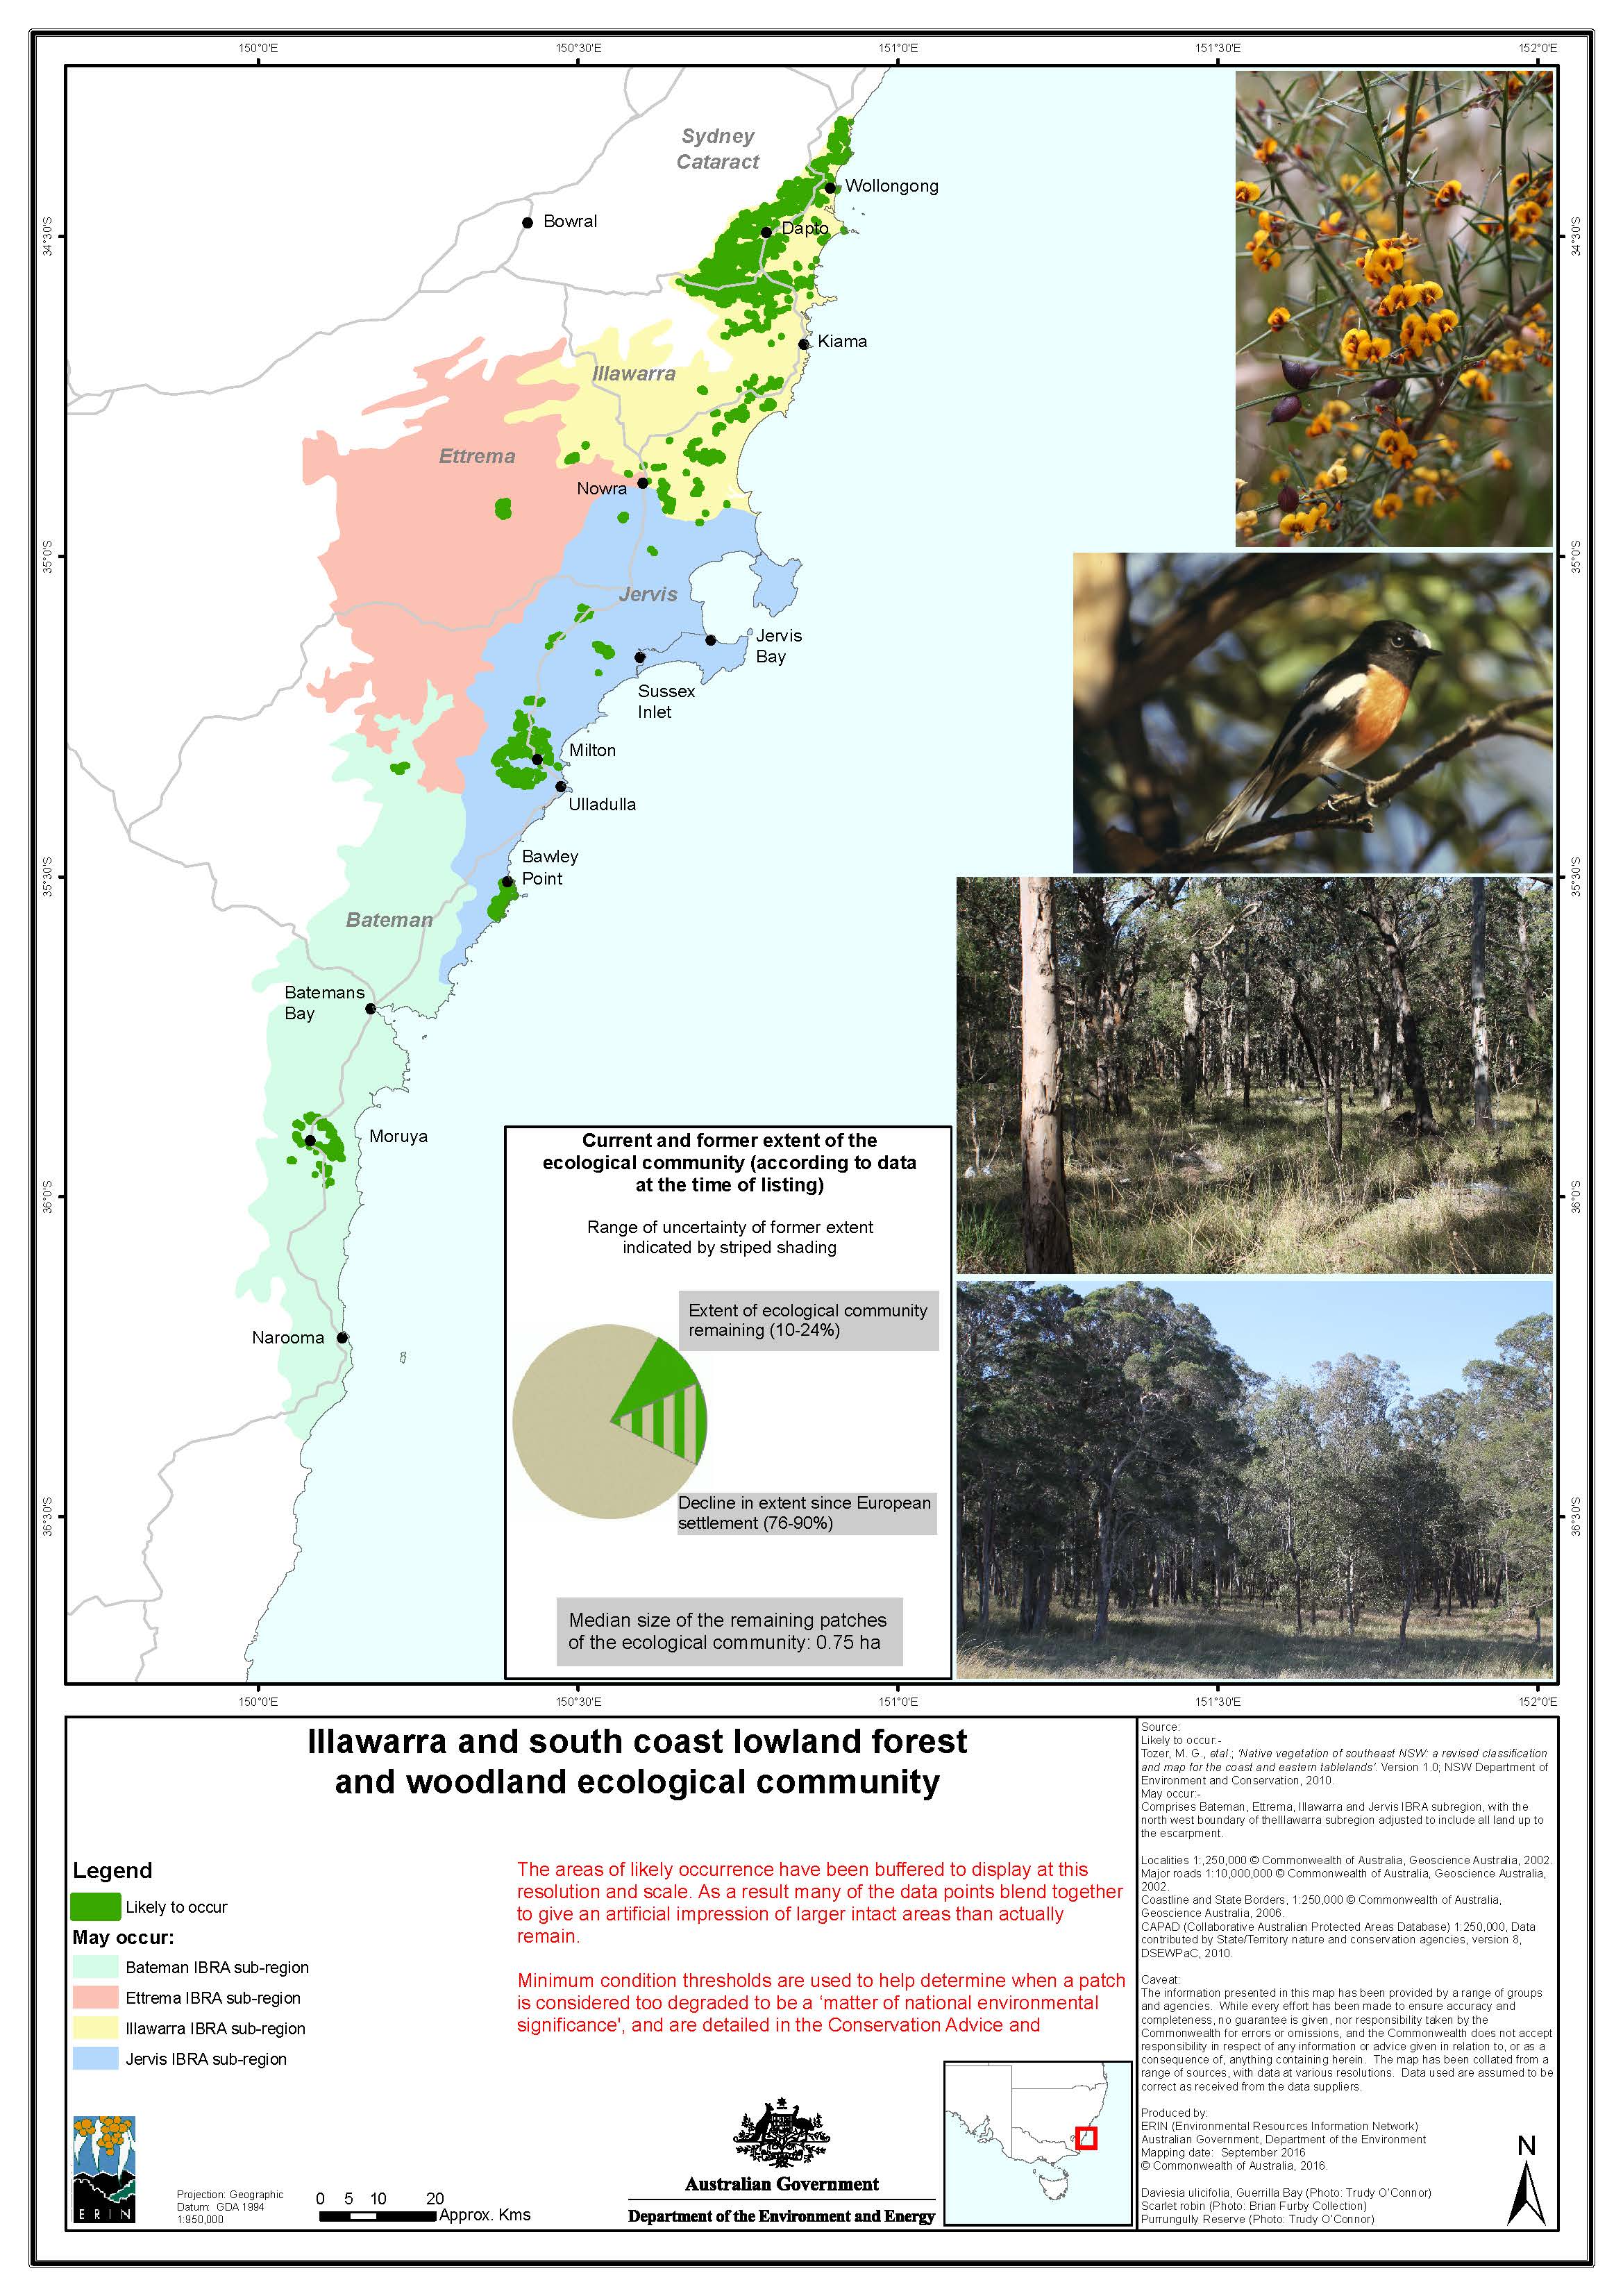 Illawarra and south coast lowland forest and woodland ecological community